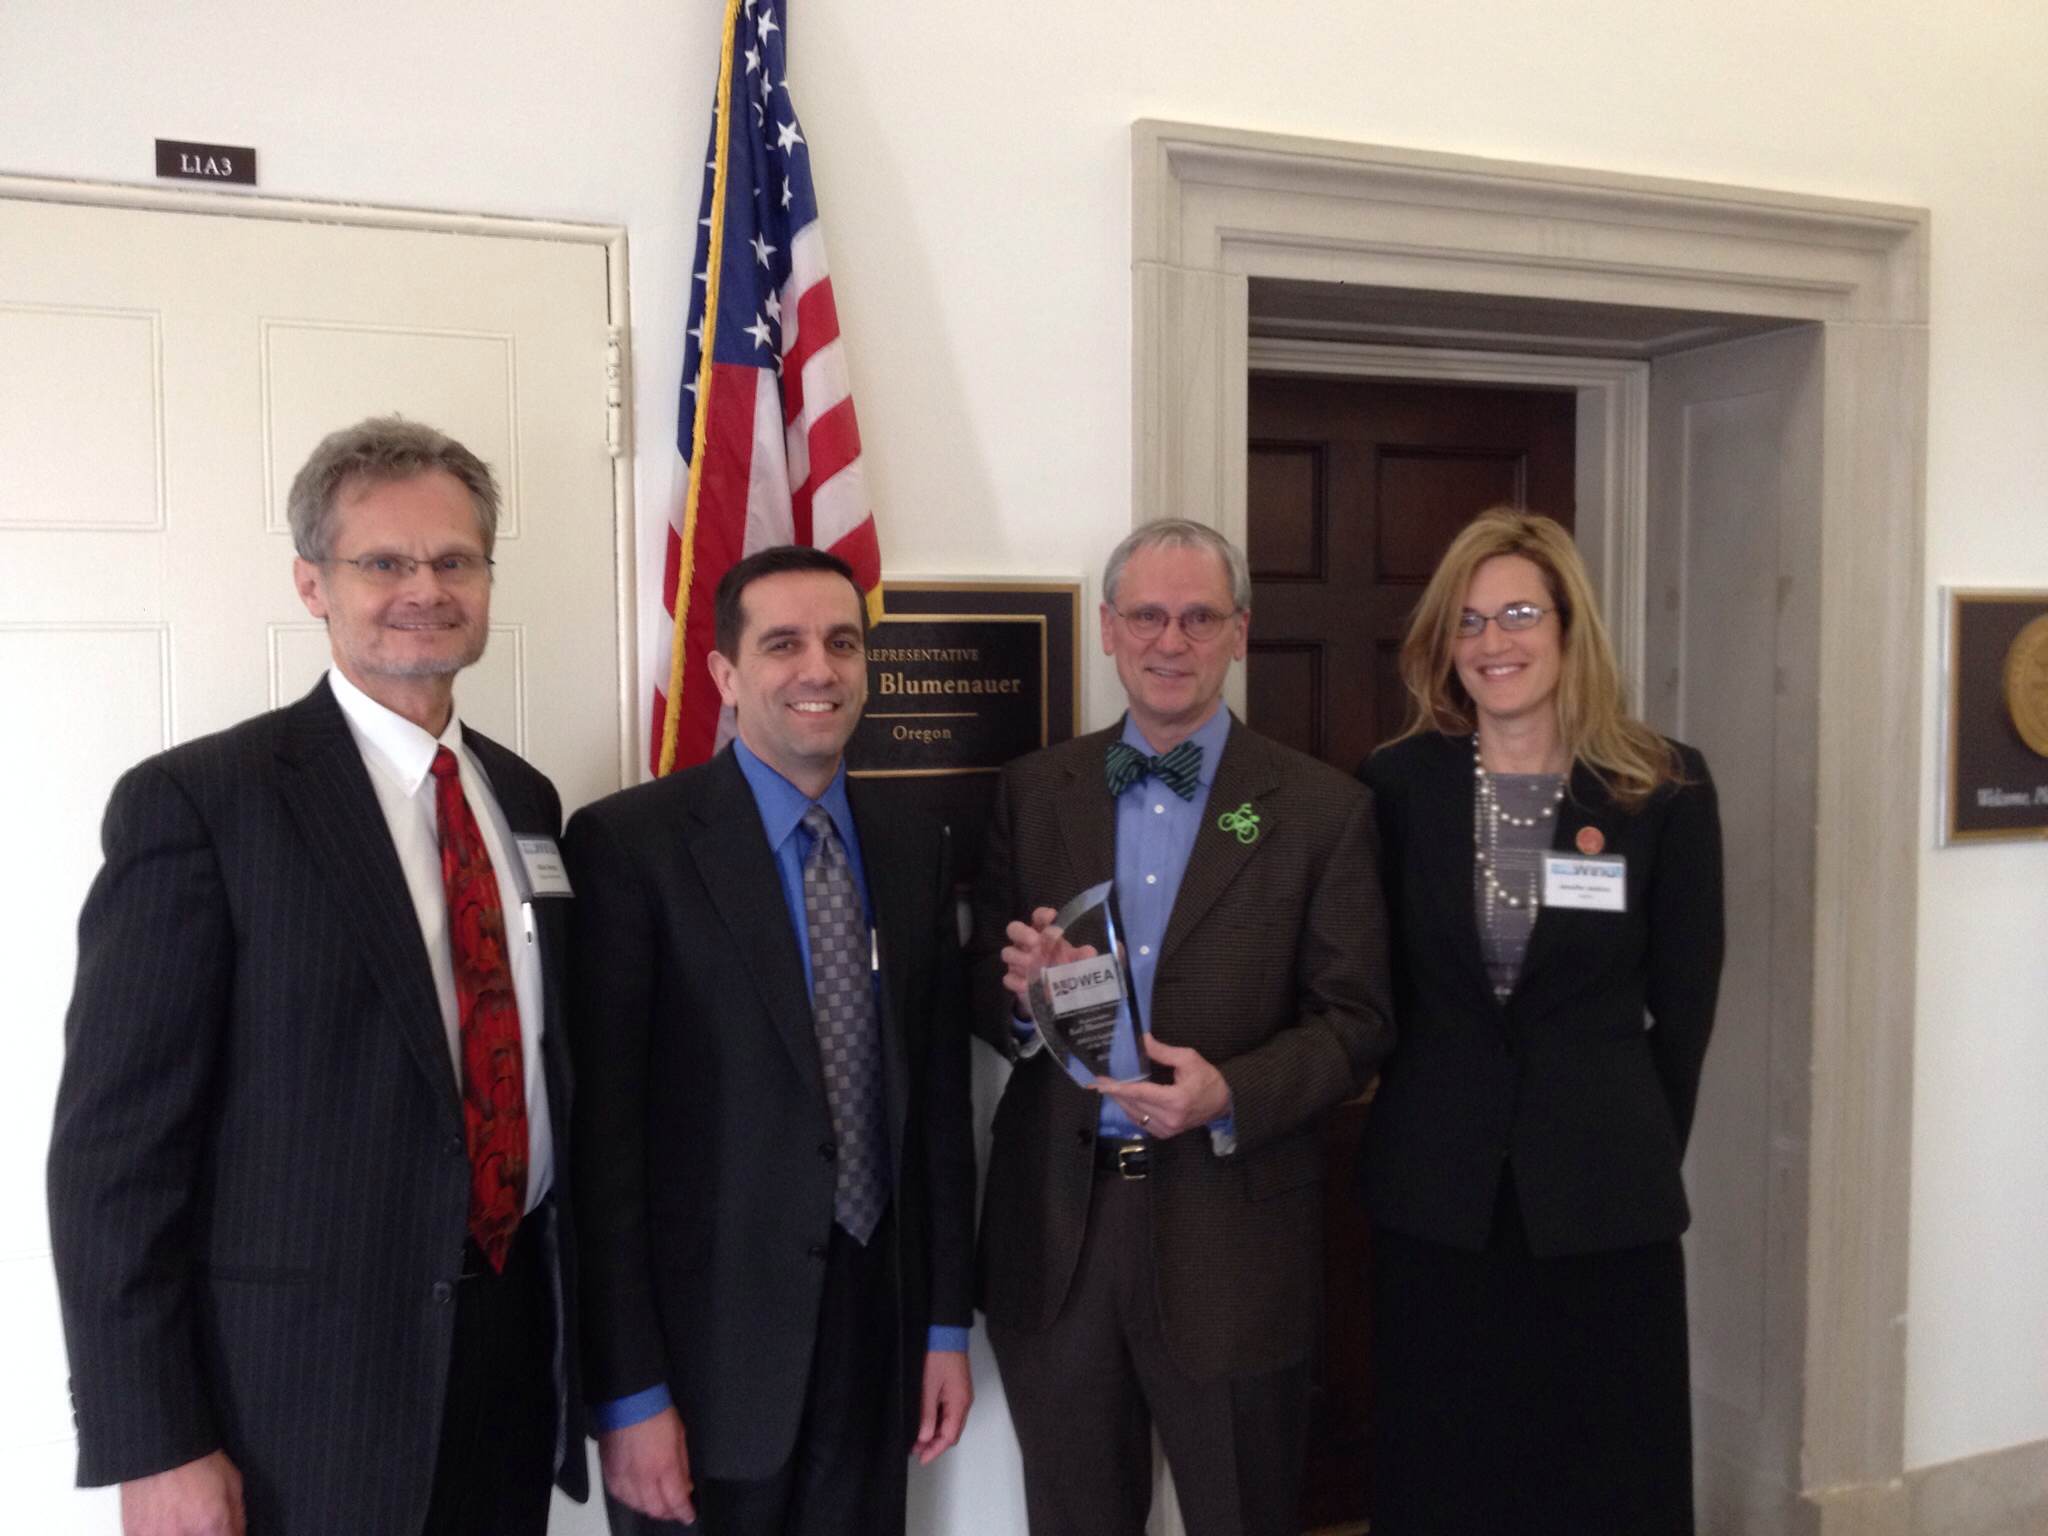 Blumenauer Receives Legislator of the Year Award from the Distributed Wind Energy Association